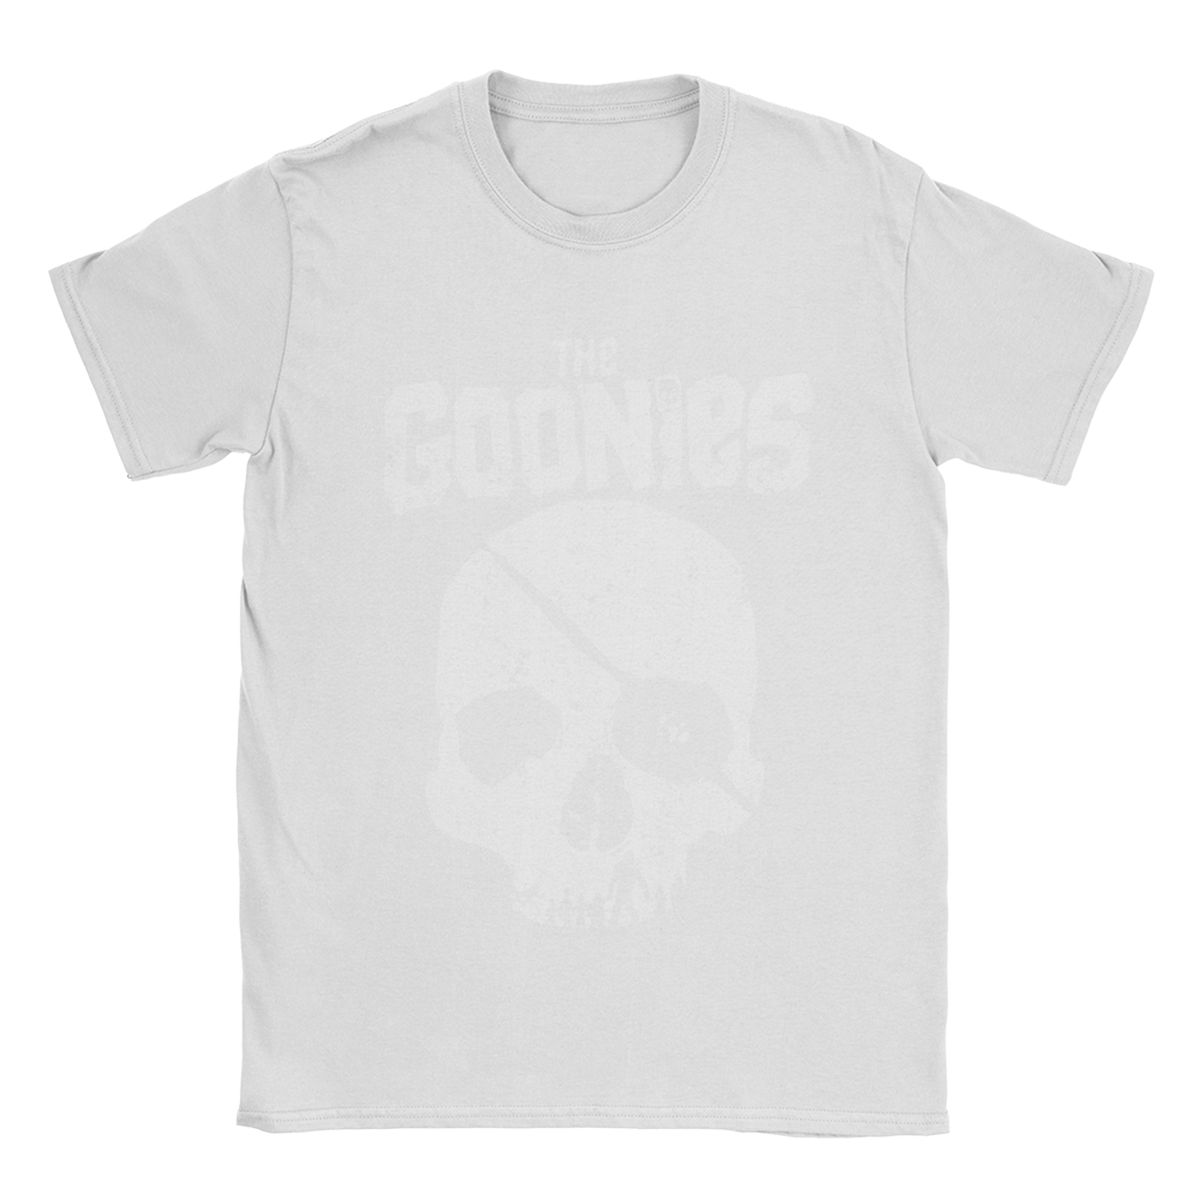 The Goonies - Classic 80s - Cult Childrens Movie - Vintage Film Lover T-Shirt-White-S-